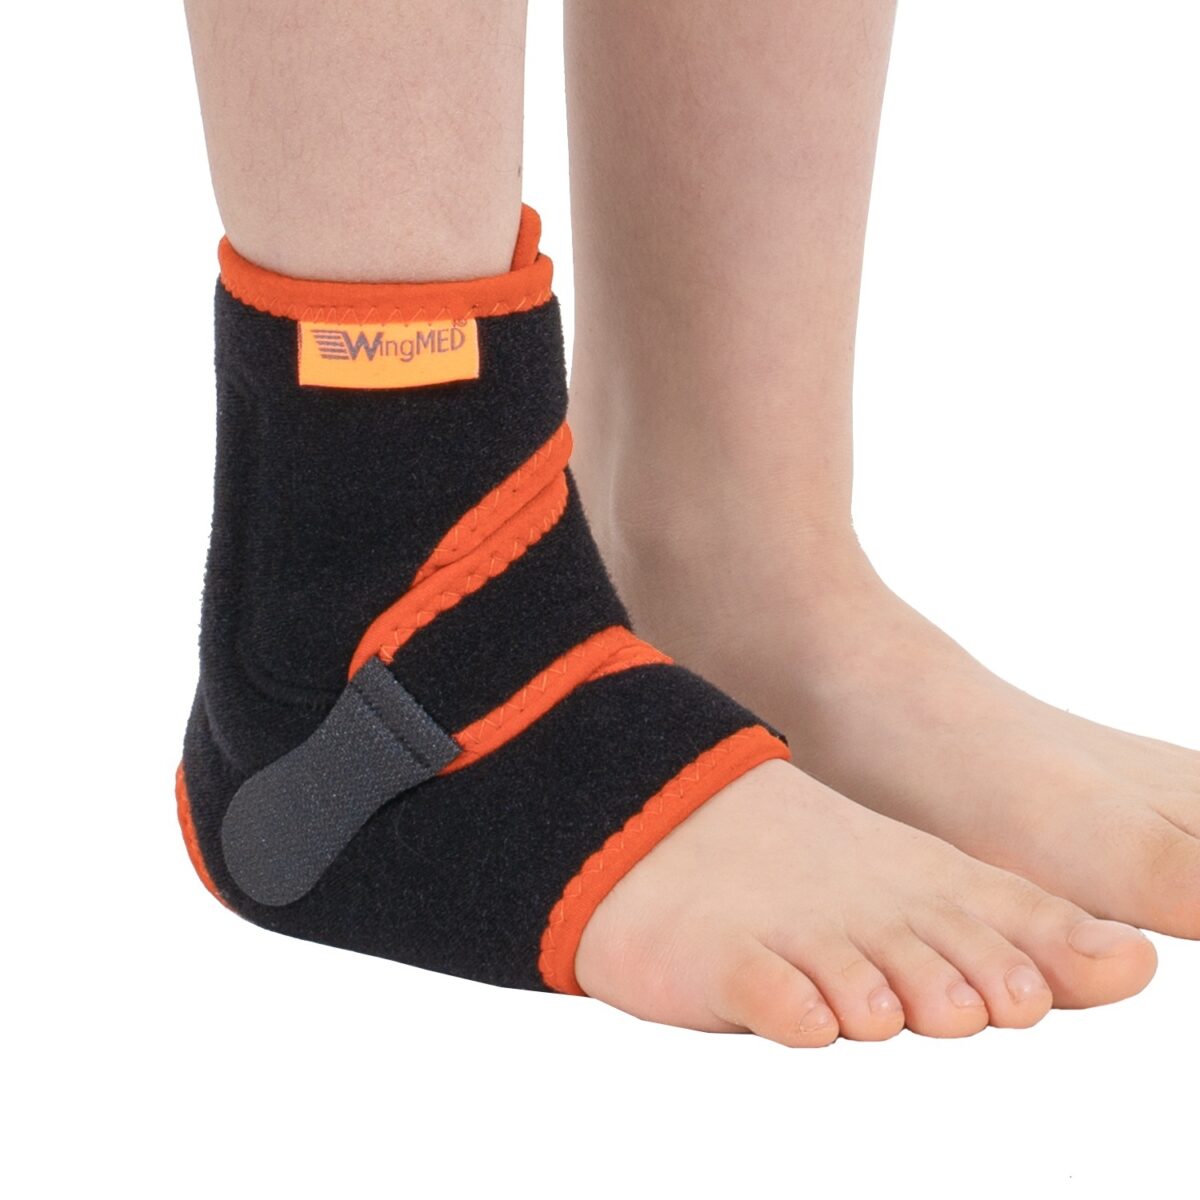 wingmed orthopedic equipments W921 malleol ankle support with 8 strap 27